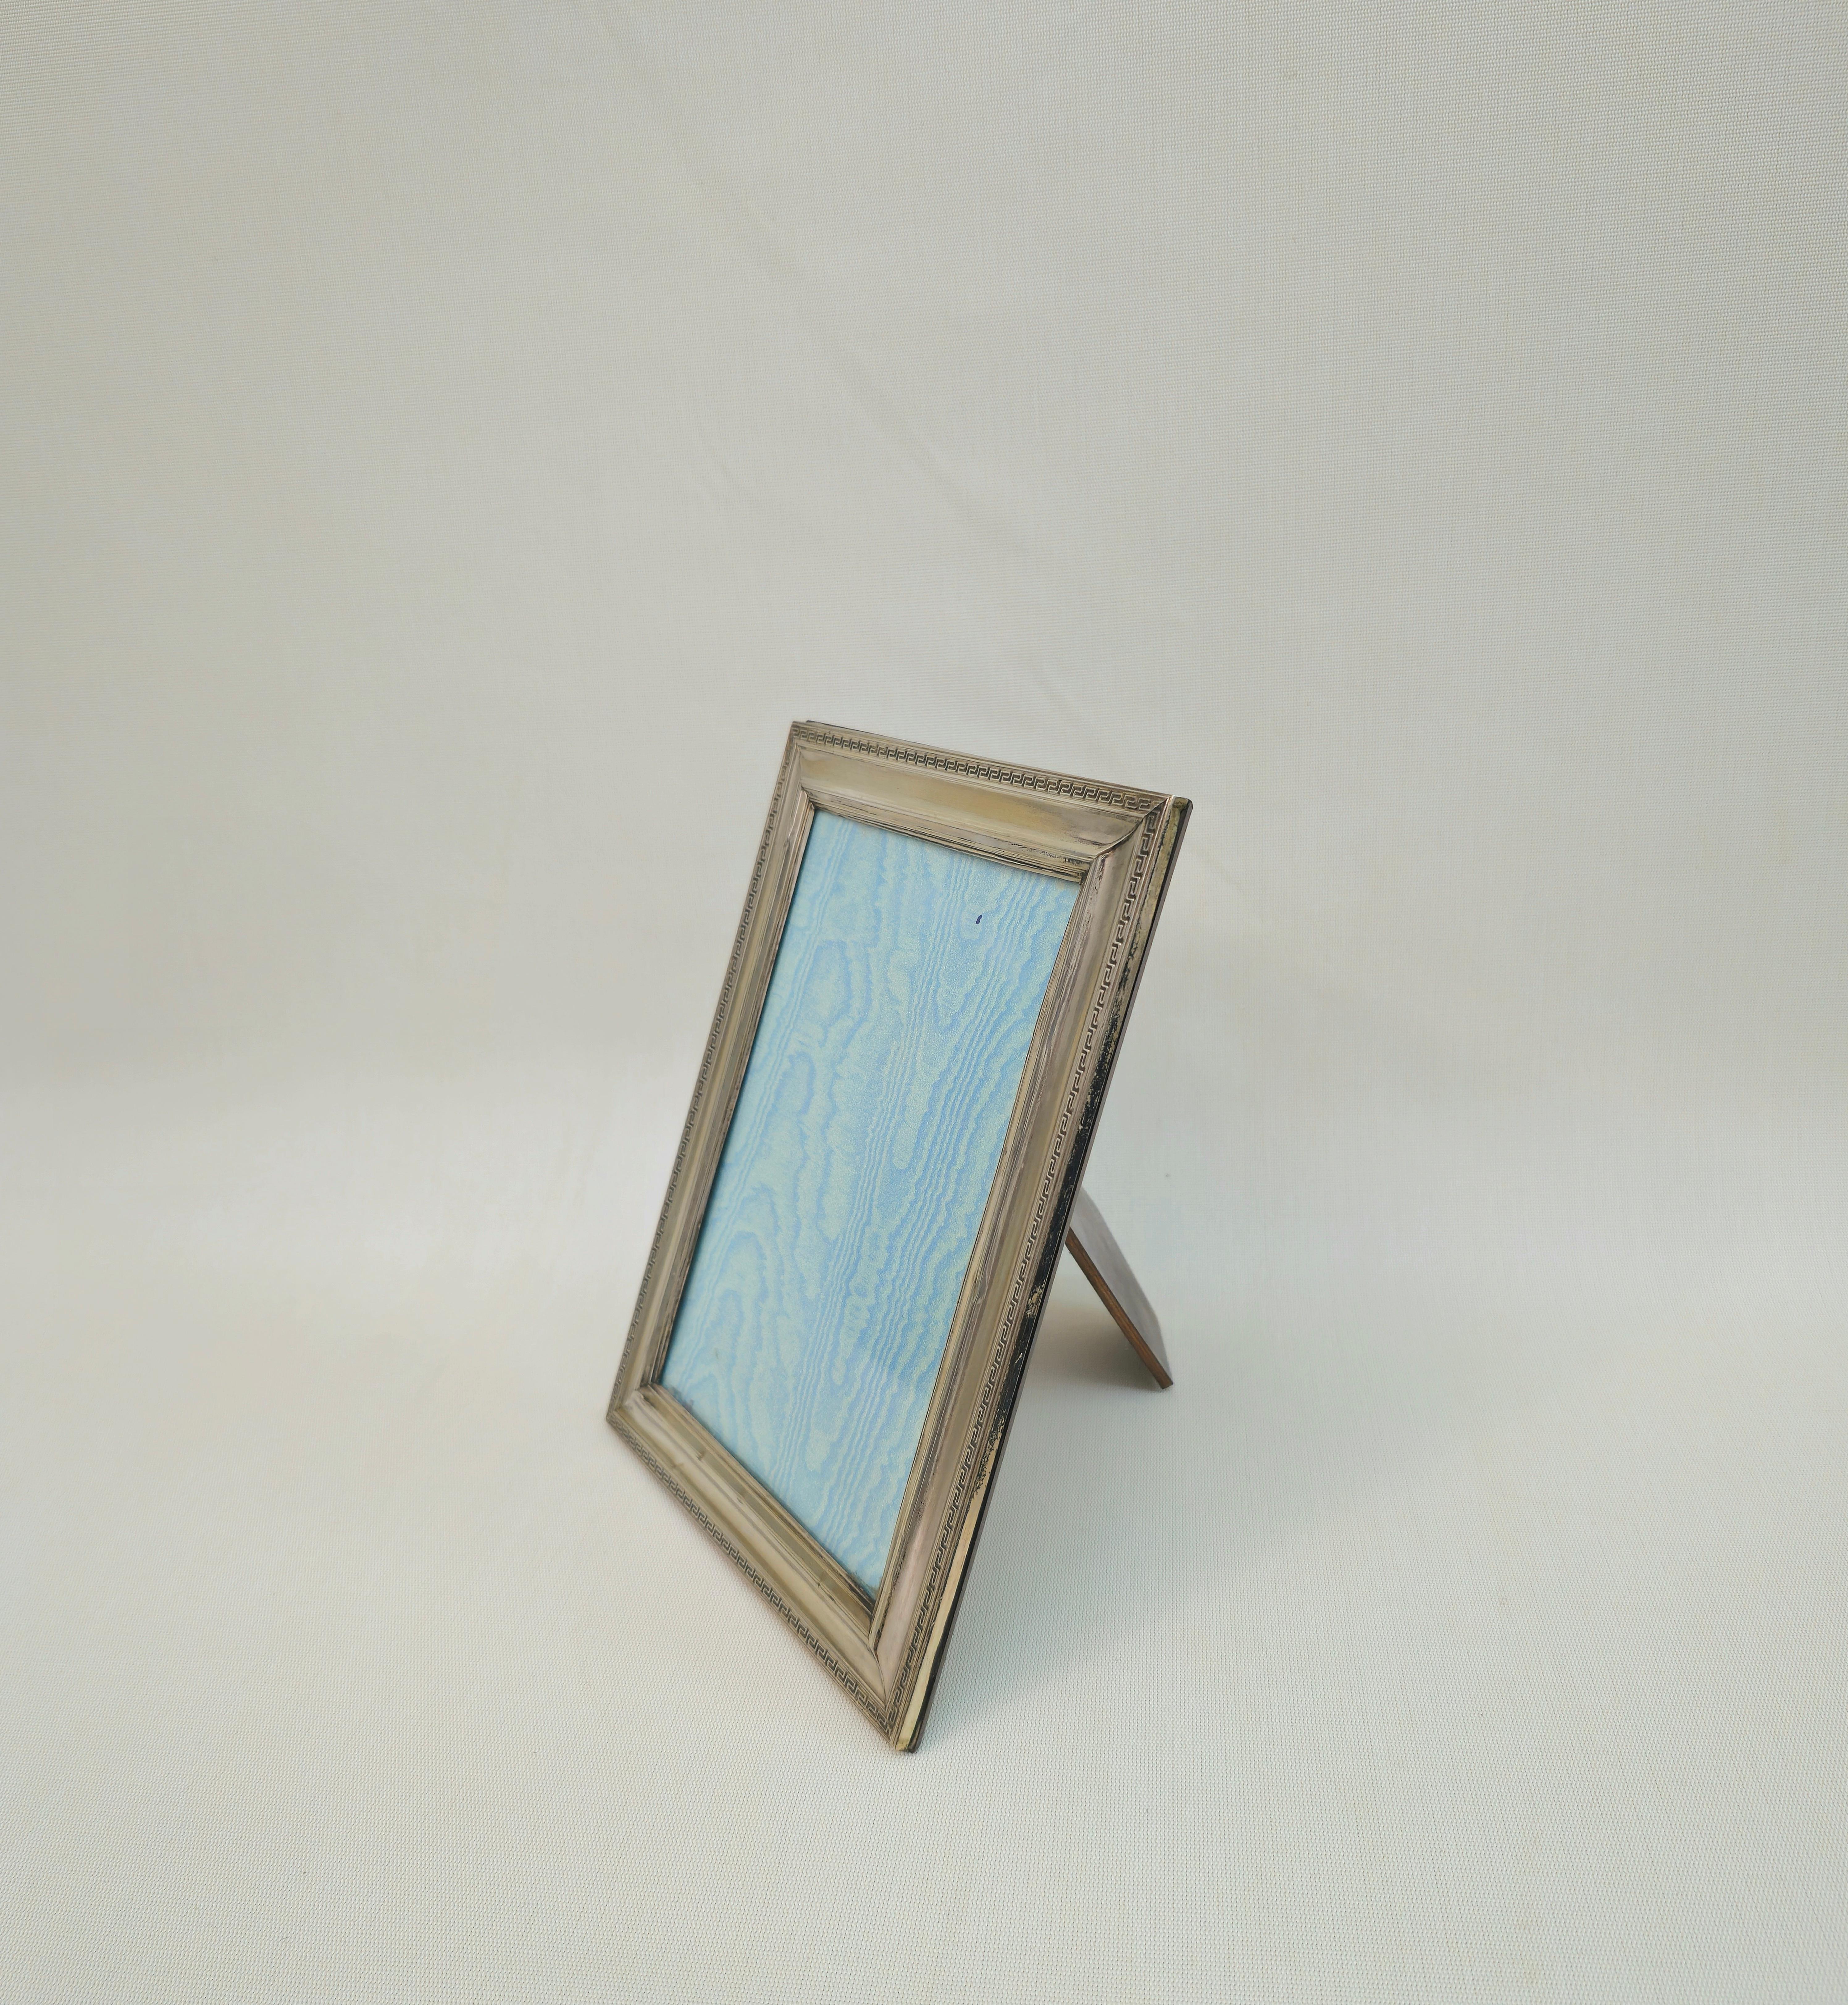 Decorative Object Picture Frame Silver 800 Wood Midcentury Italian Design 1950s For Sale 3